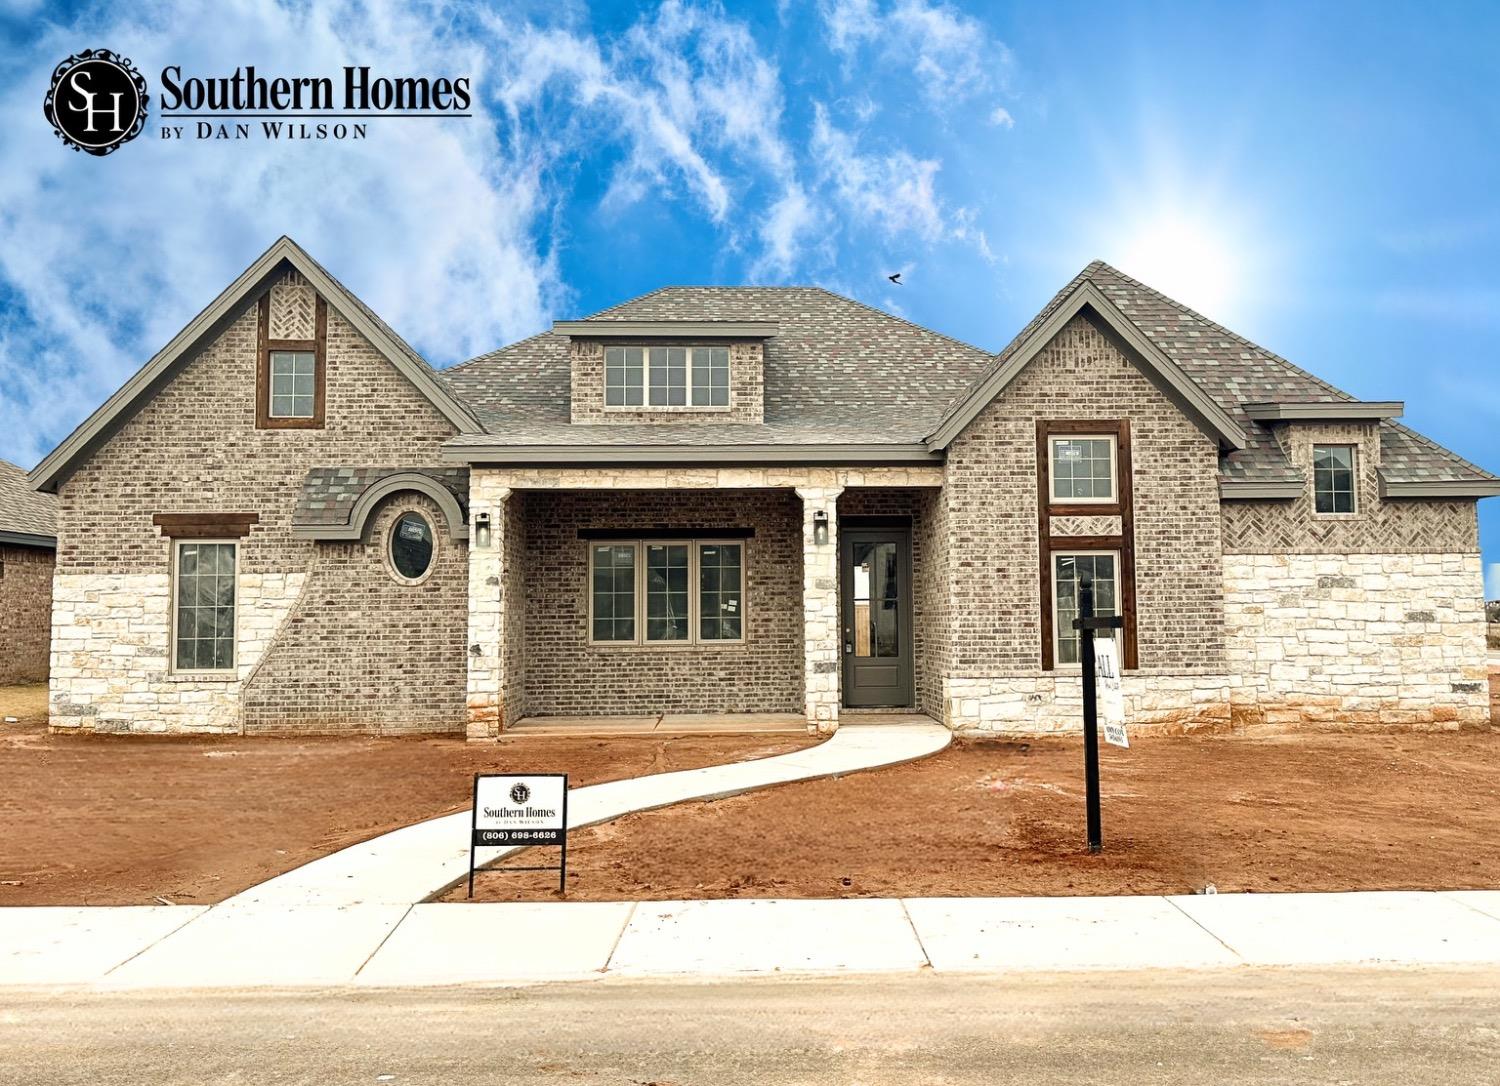 $15,000 BUYER INCENTIVE!! Southern Homes by Dan Wilson is proud to present the Harlington, a beautifully crafted and move-in ready home for you and your family. This home features 4 bedrooms, 3 bathrooms and a 3 car tandem garage. This Frenship ISD neighborhood is conveniently located in The Ridge, off 98th and Upland, a prime location that is close to shopping, dining, and fun yet secluded within its own quiet and tucked away neighborhood. Quality construction, fabulous location and a trusted name! WELCOME HOME! ***Selections subject to change. Cabinetry and small changes to plans subject to change at designers discretion***